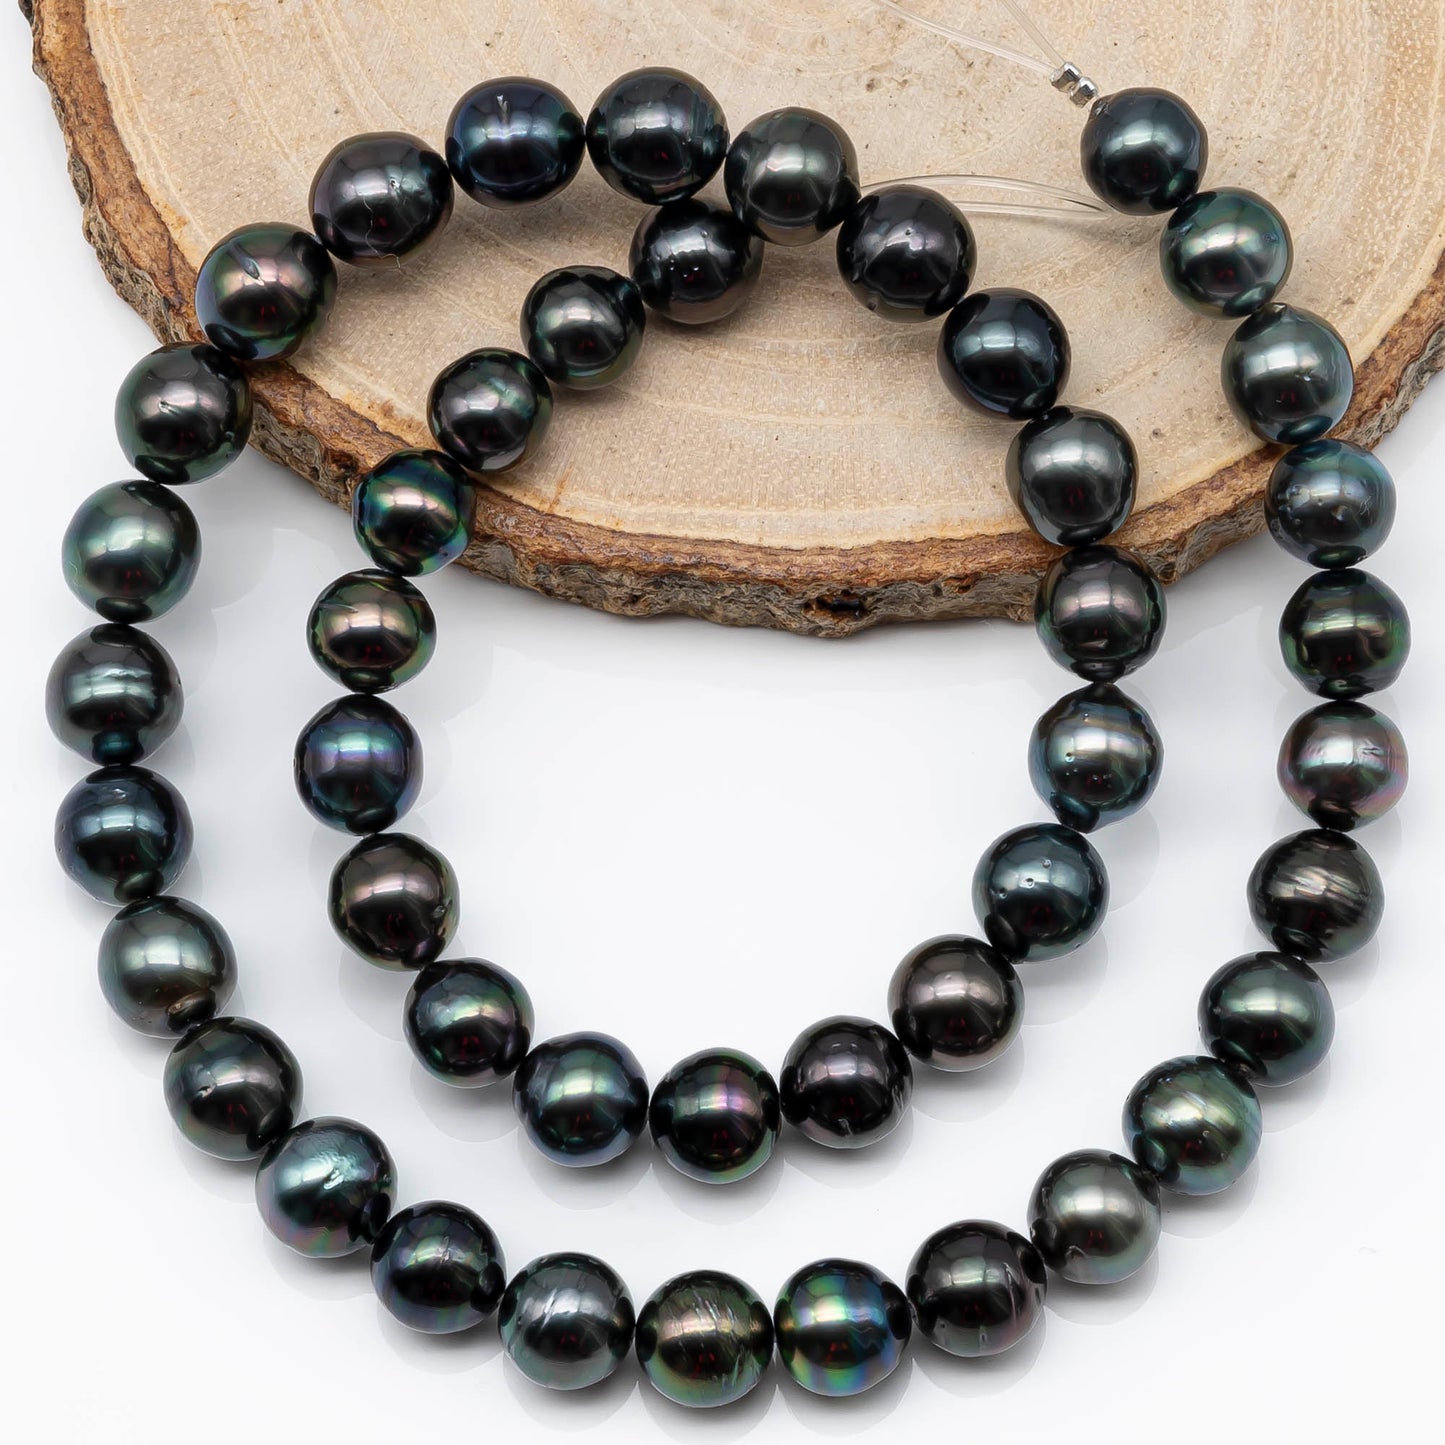 8-9mm Tahitian Pearl in Full Strand with All Natural Color with High Luster for Jewelry Making, SKU# 1879TH